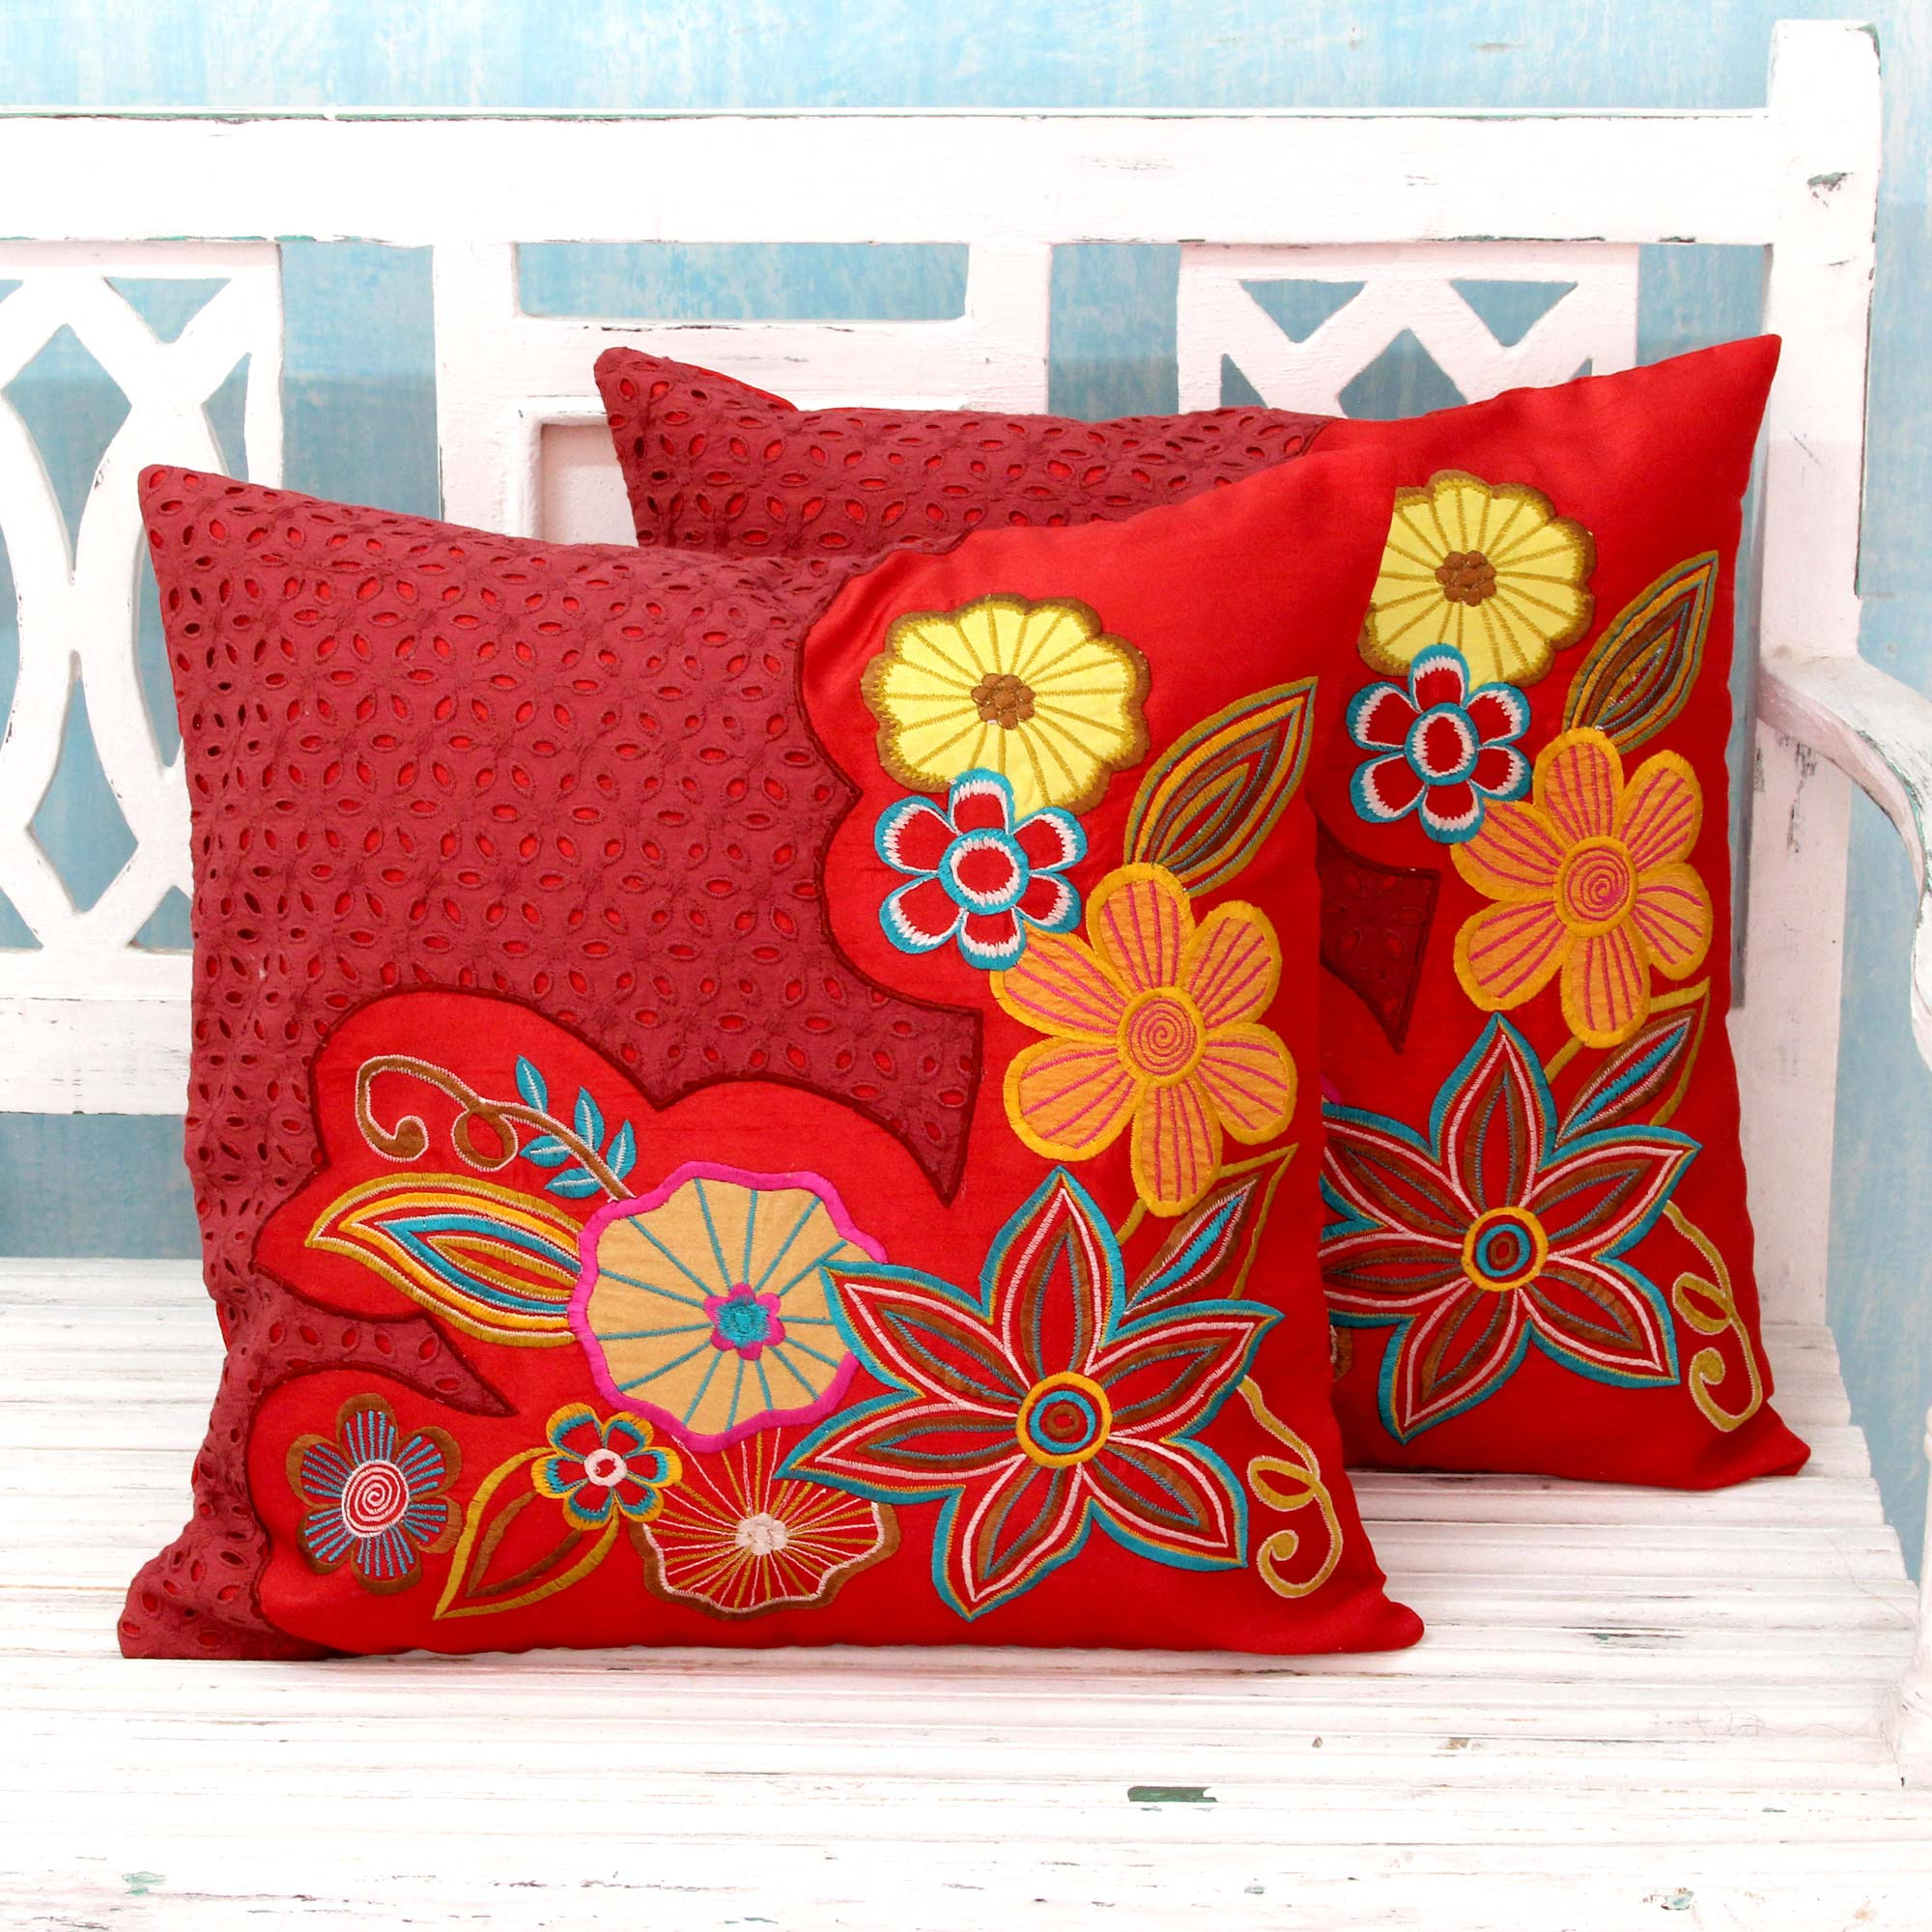 Applique cushion cover mixture of machine applique and hand embroidery flower design in pink and blue